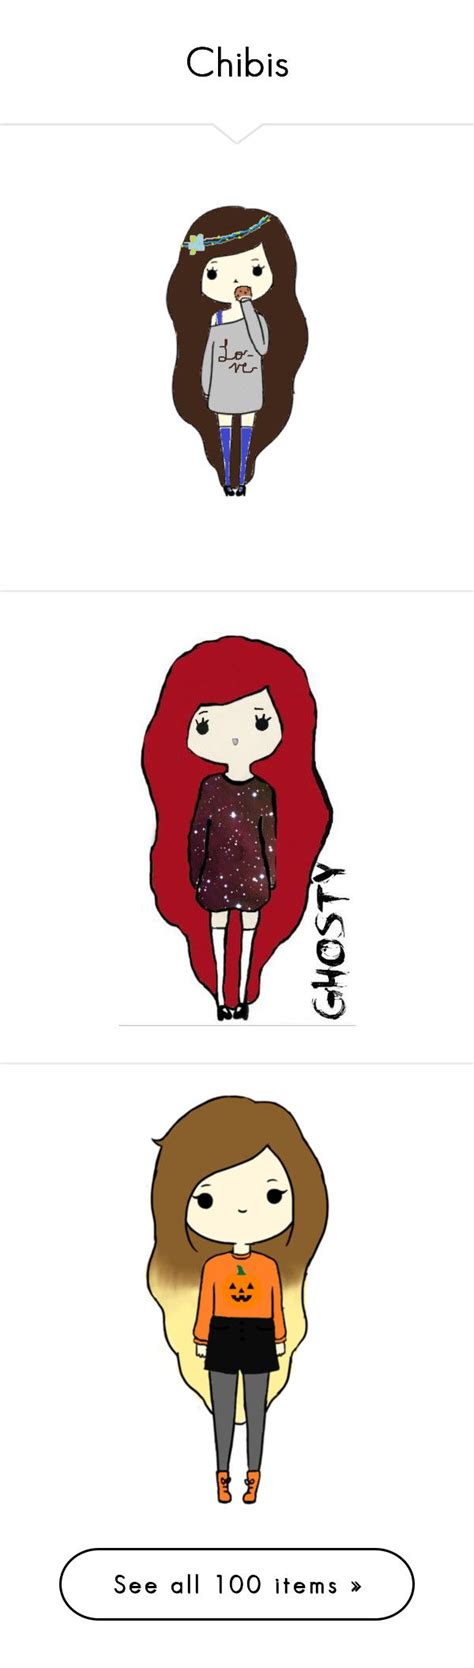 Chibis By Thequeenofreading Liked On Polyvore Featuring Fillers